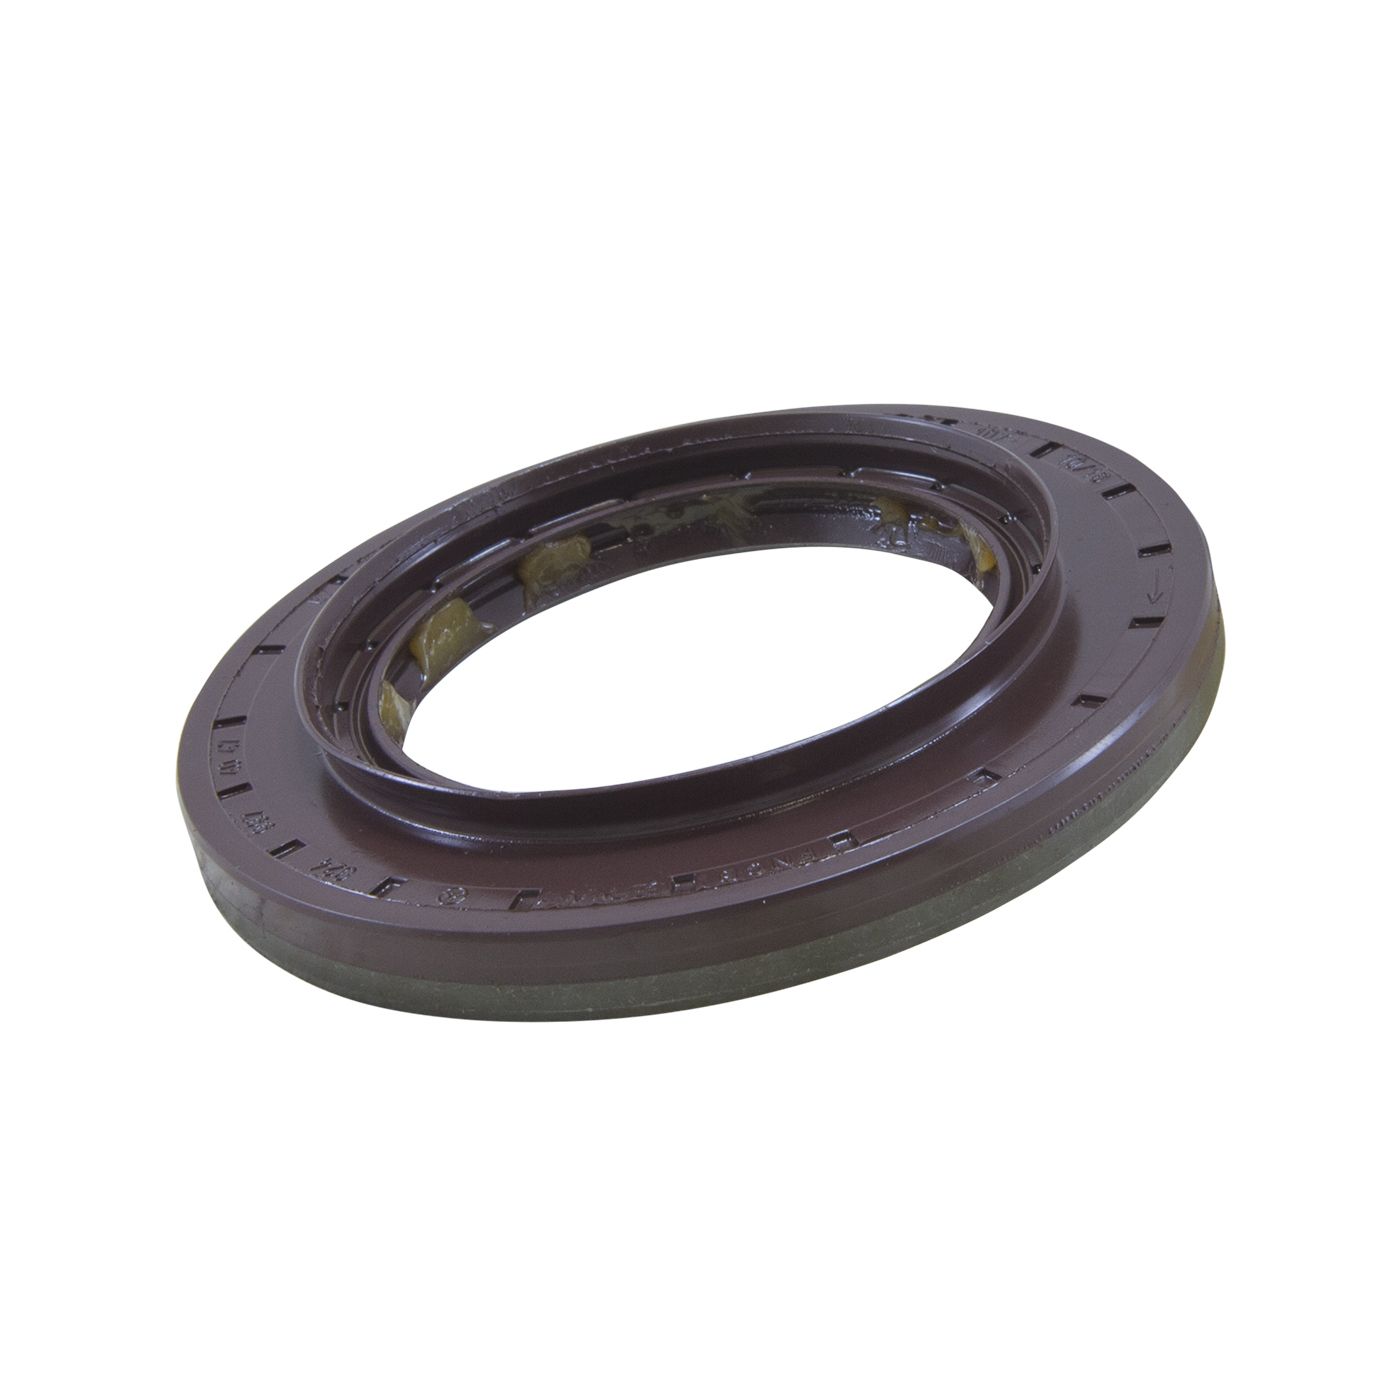 Dodge MAGNA/ STEYR front pinion seal, 09 & up. 